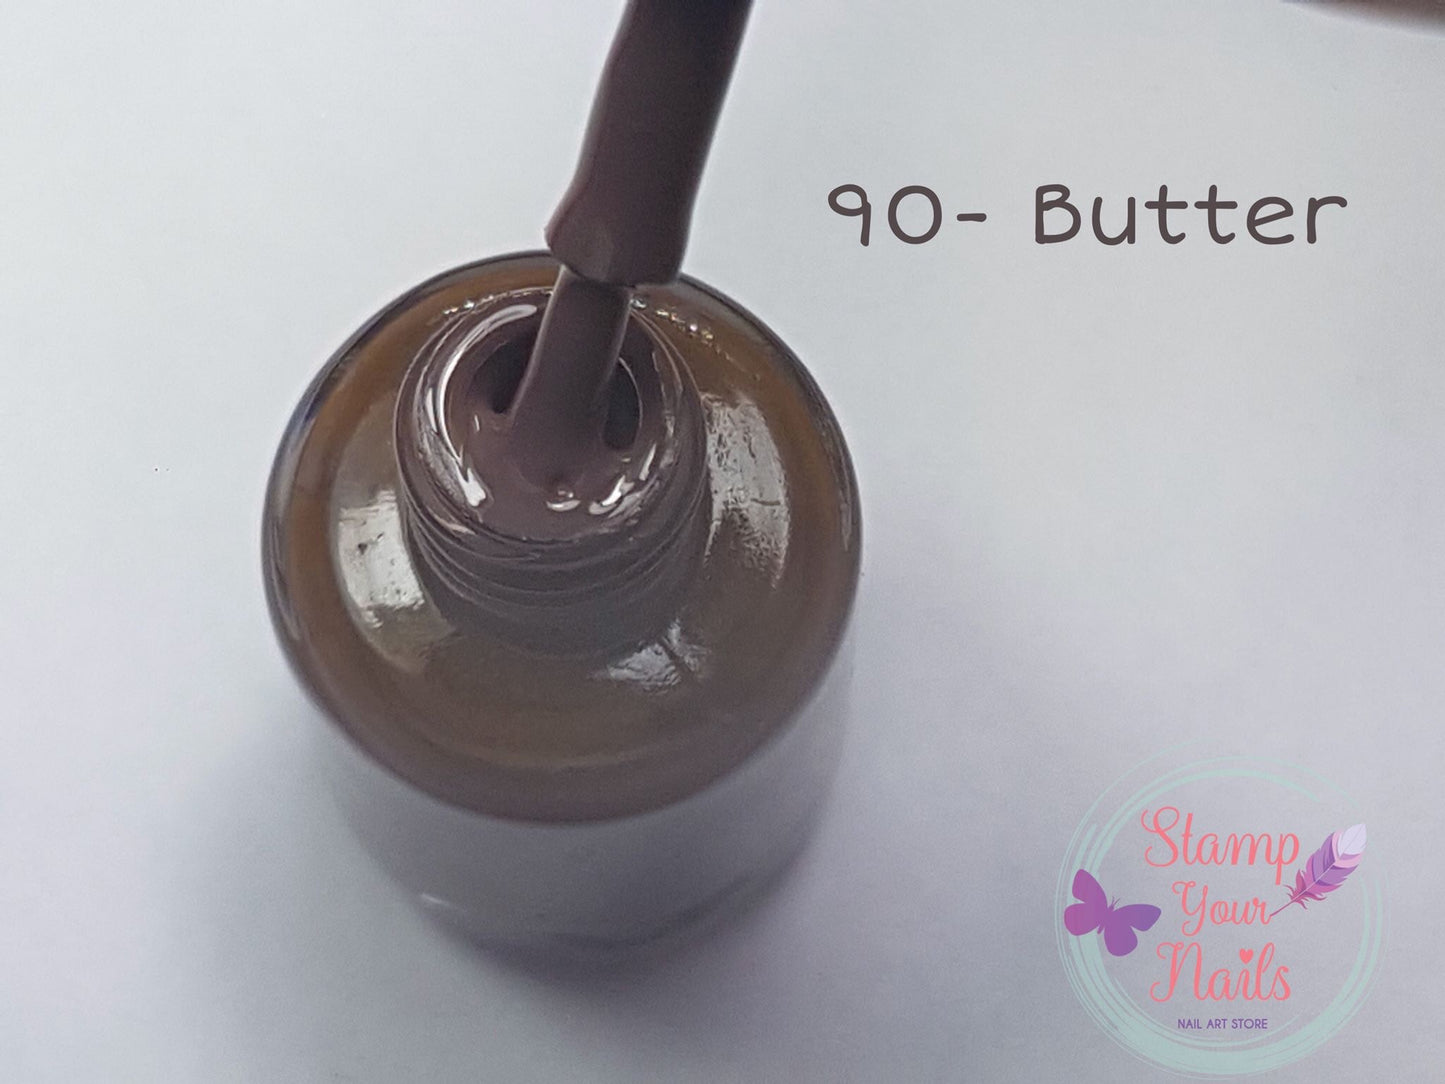 90 Butter - Stamp your nails